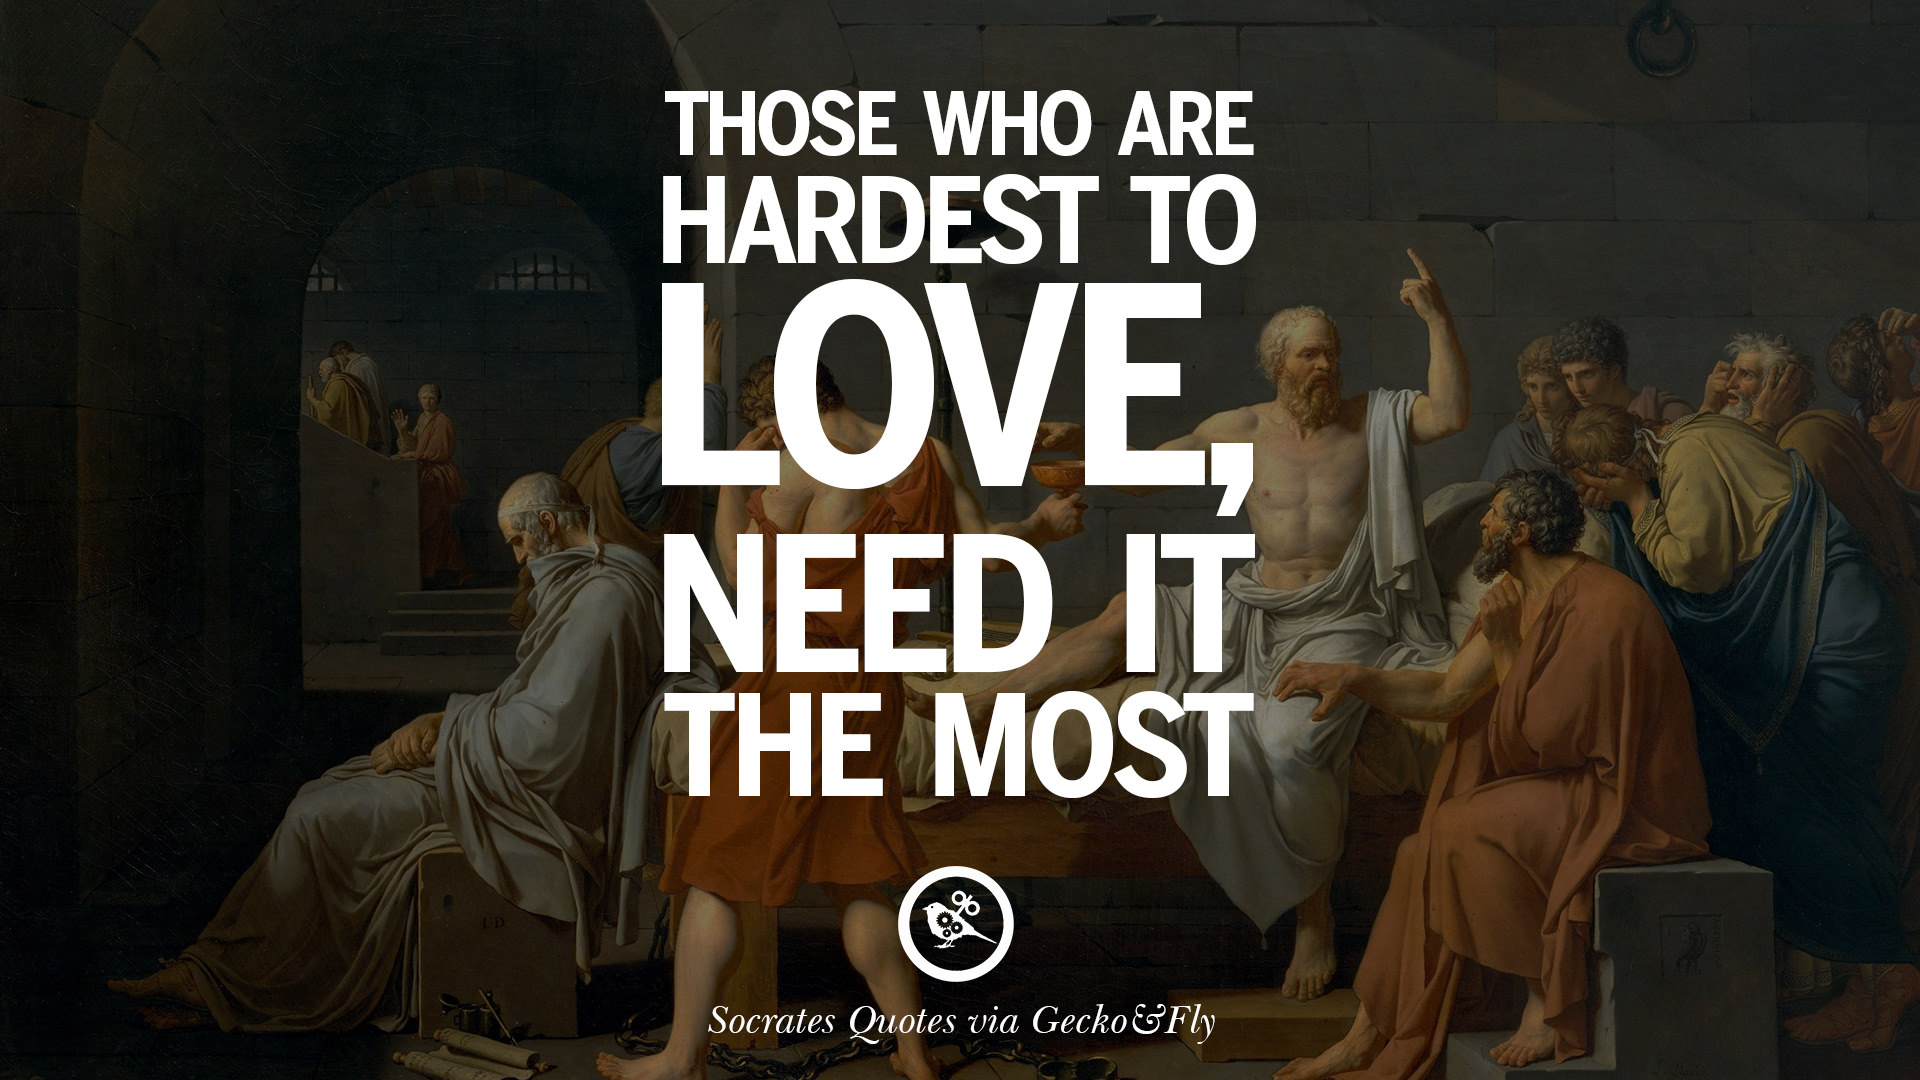 Quotes By Socrates Those who are hardest to love need it the most